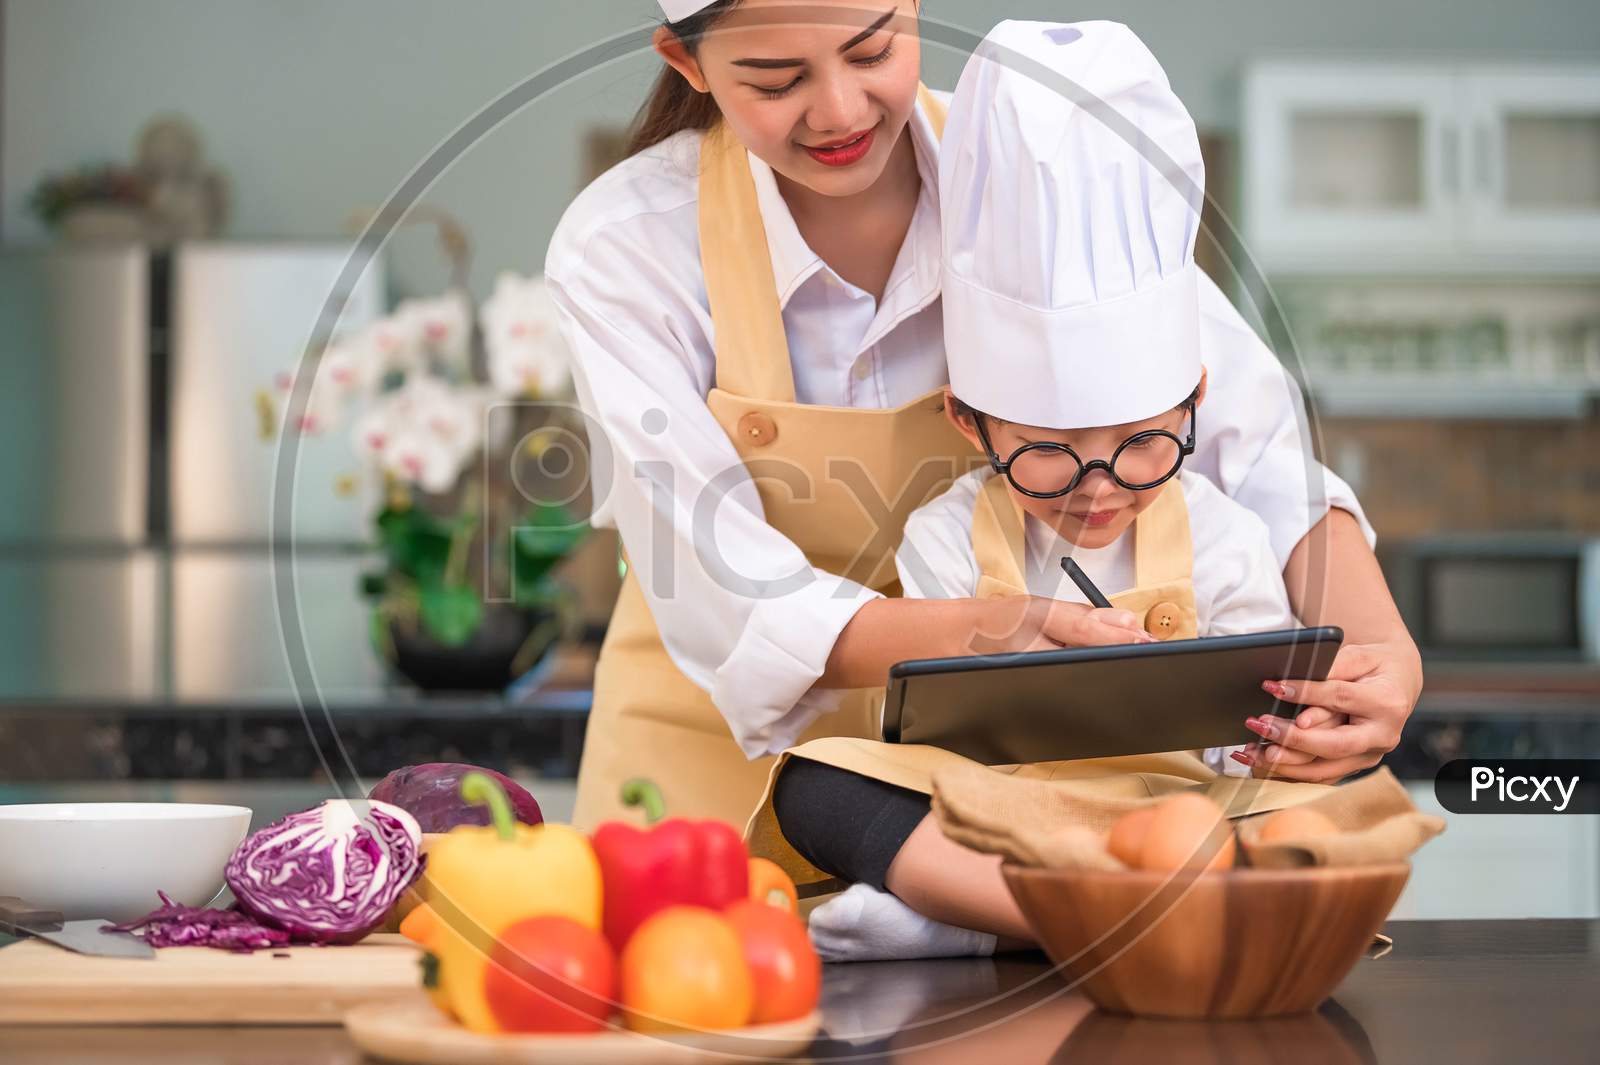 Asian Beauty Mother And Cute Little Boy Prepare Online Shopping And Listing Ingredient For Cooking In Kitchen At Home With Tablet. People Lifestyles And Family. Homemade Food And Ingredient Concept